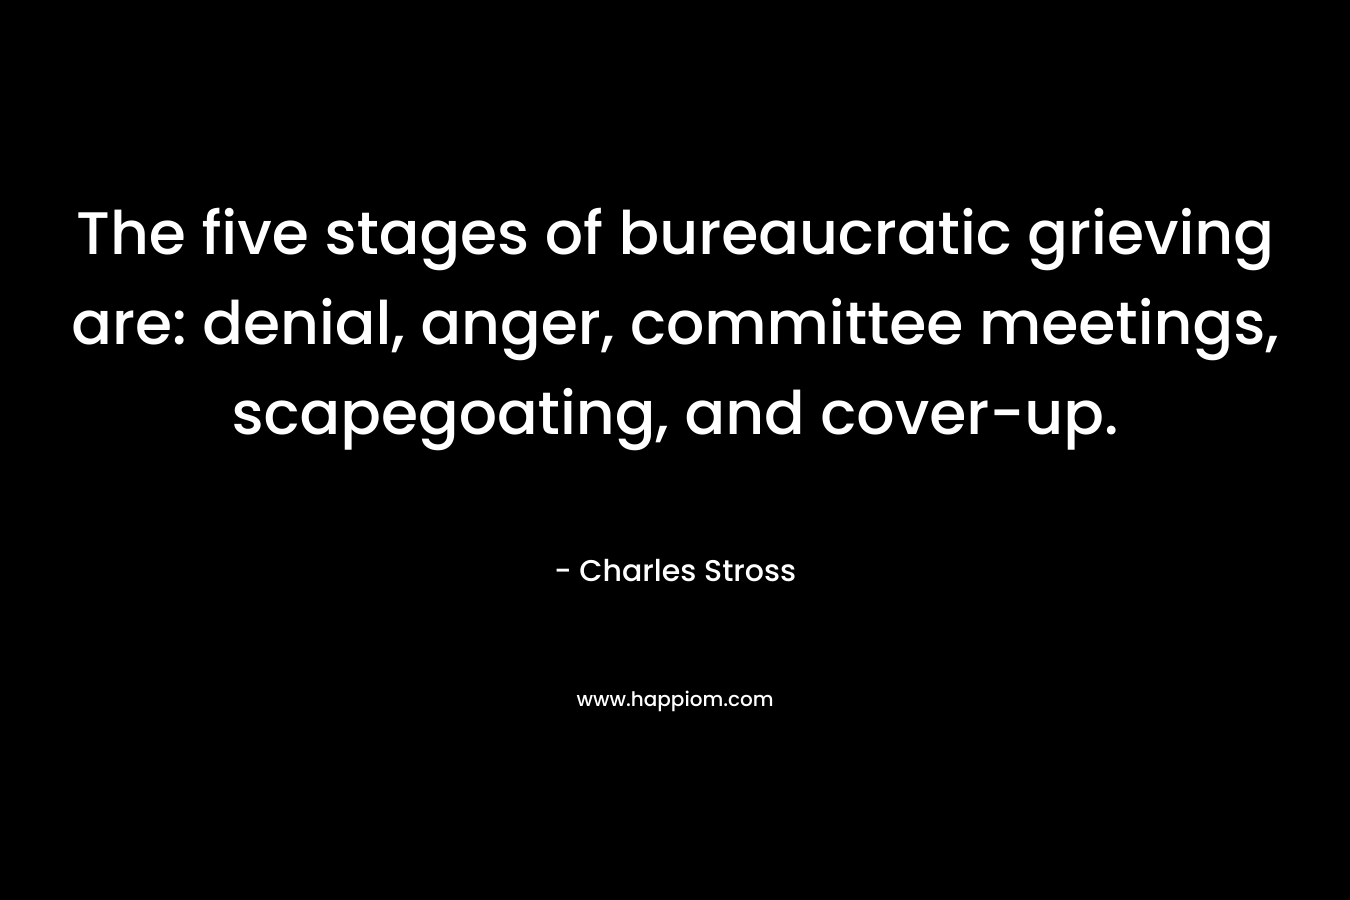 The five stages of bureaucratic grieving are: denial, anger, committee meetings, scapegoating, and cover-up. – Charles Stross